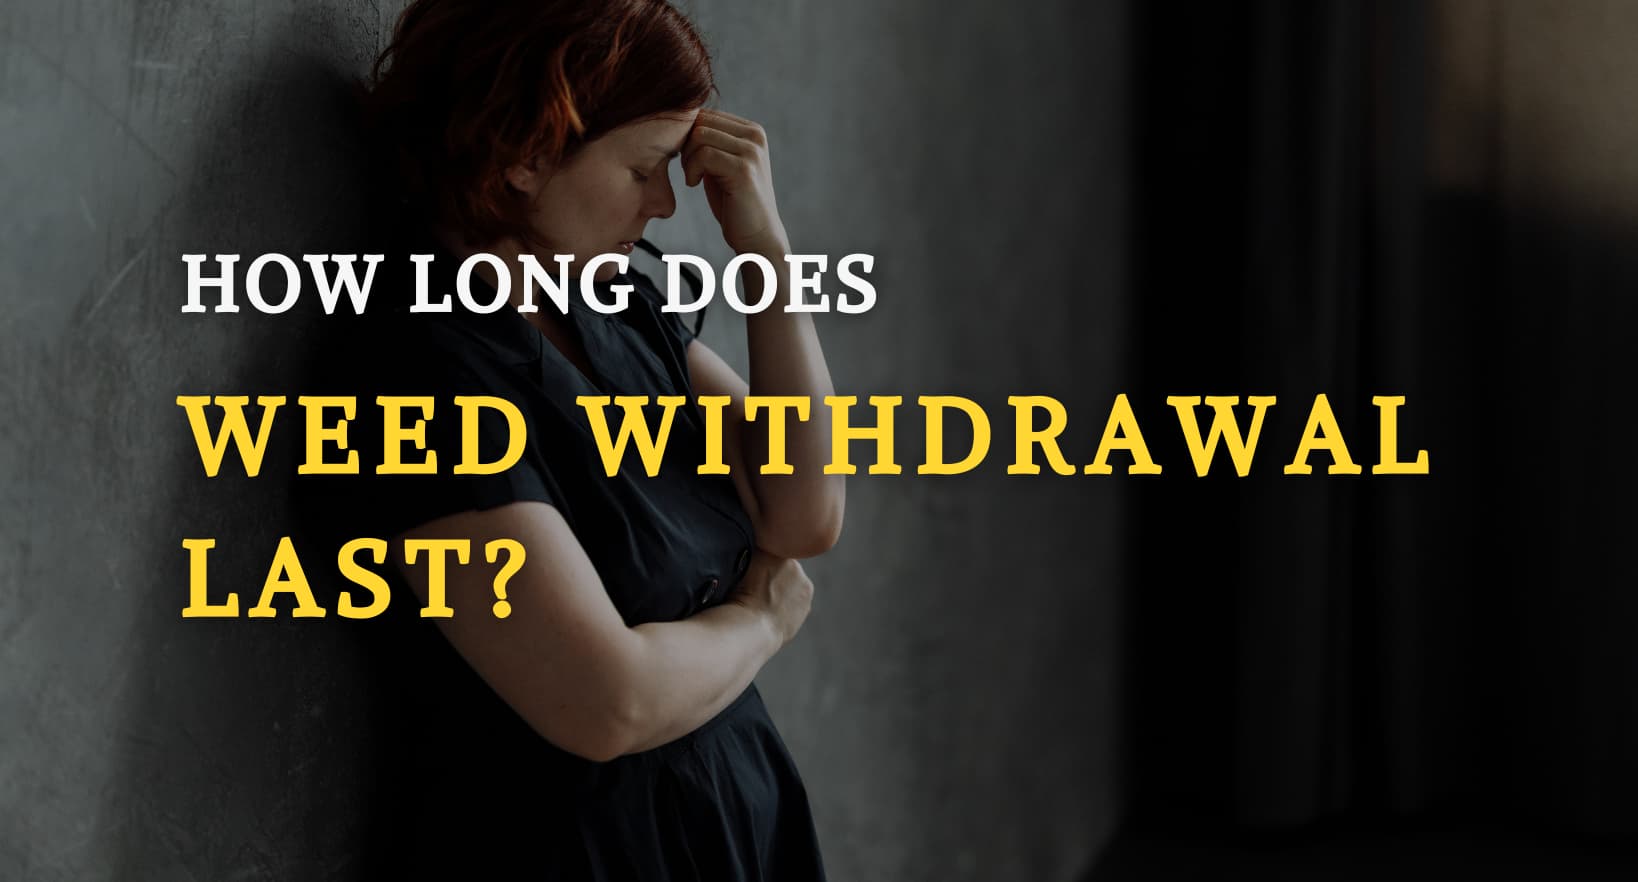 How Long Does Weed Withdrawal Last? (A Detailed Timeline)